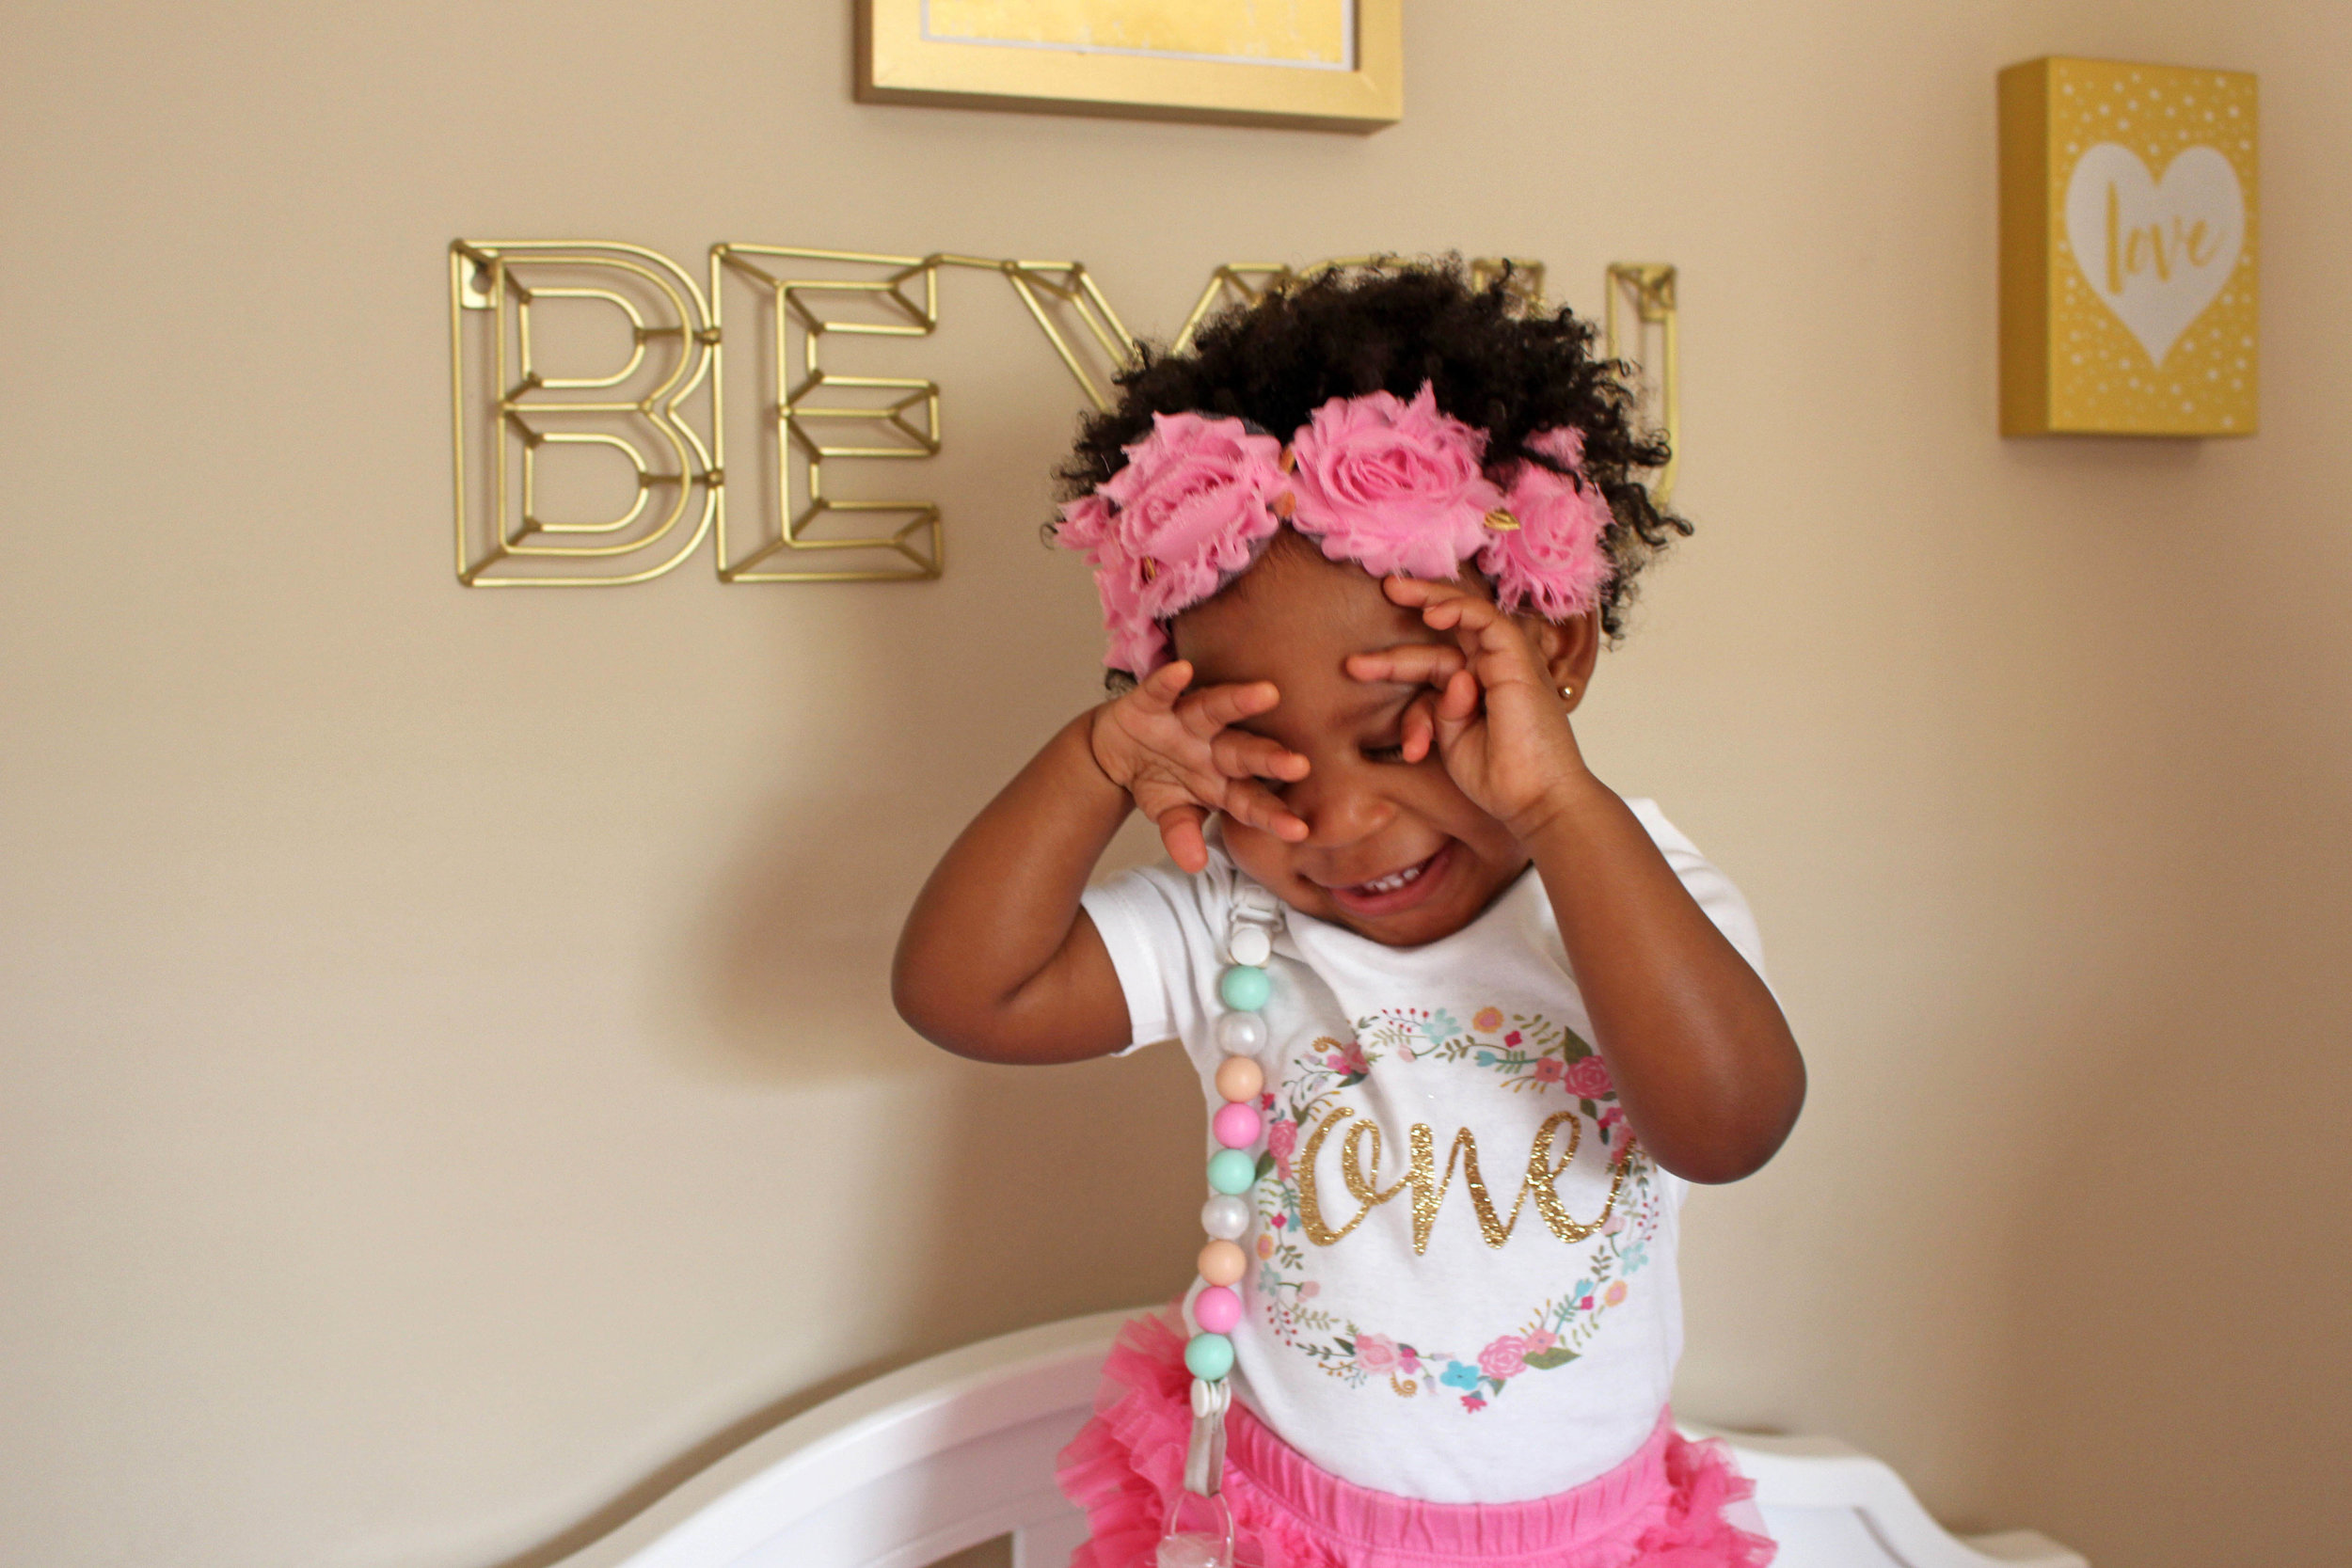  floral themed 1st bday - "one" bodysuit and flower crown | Pish Posh Perfect&nbsp; 